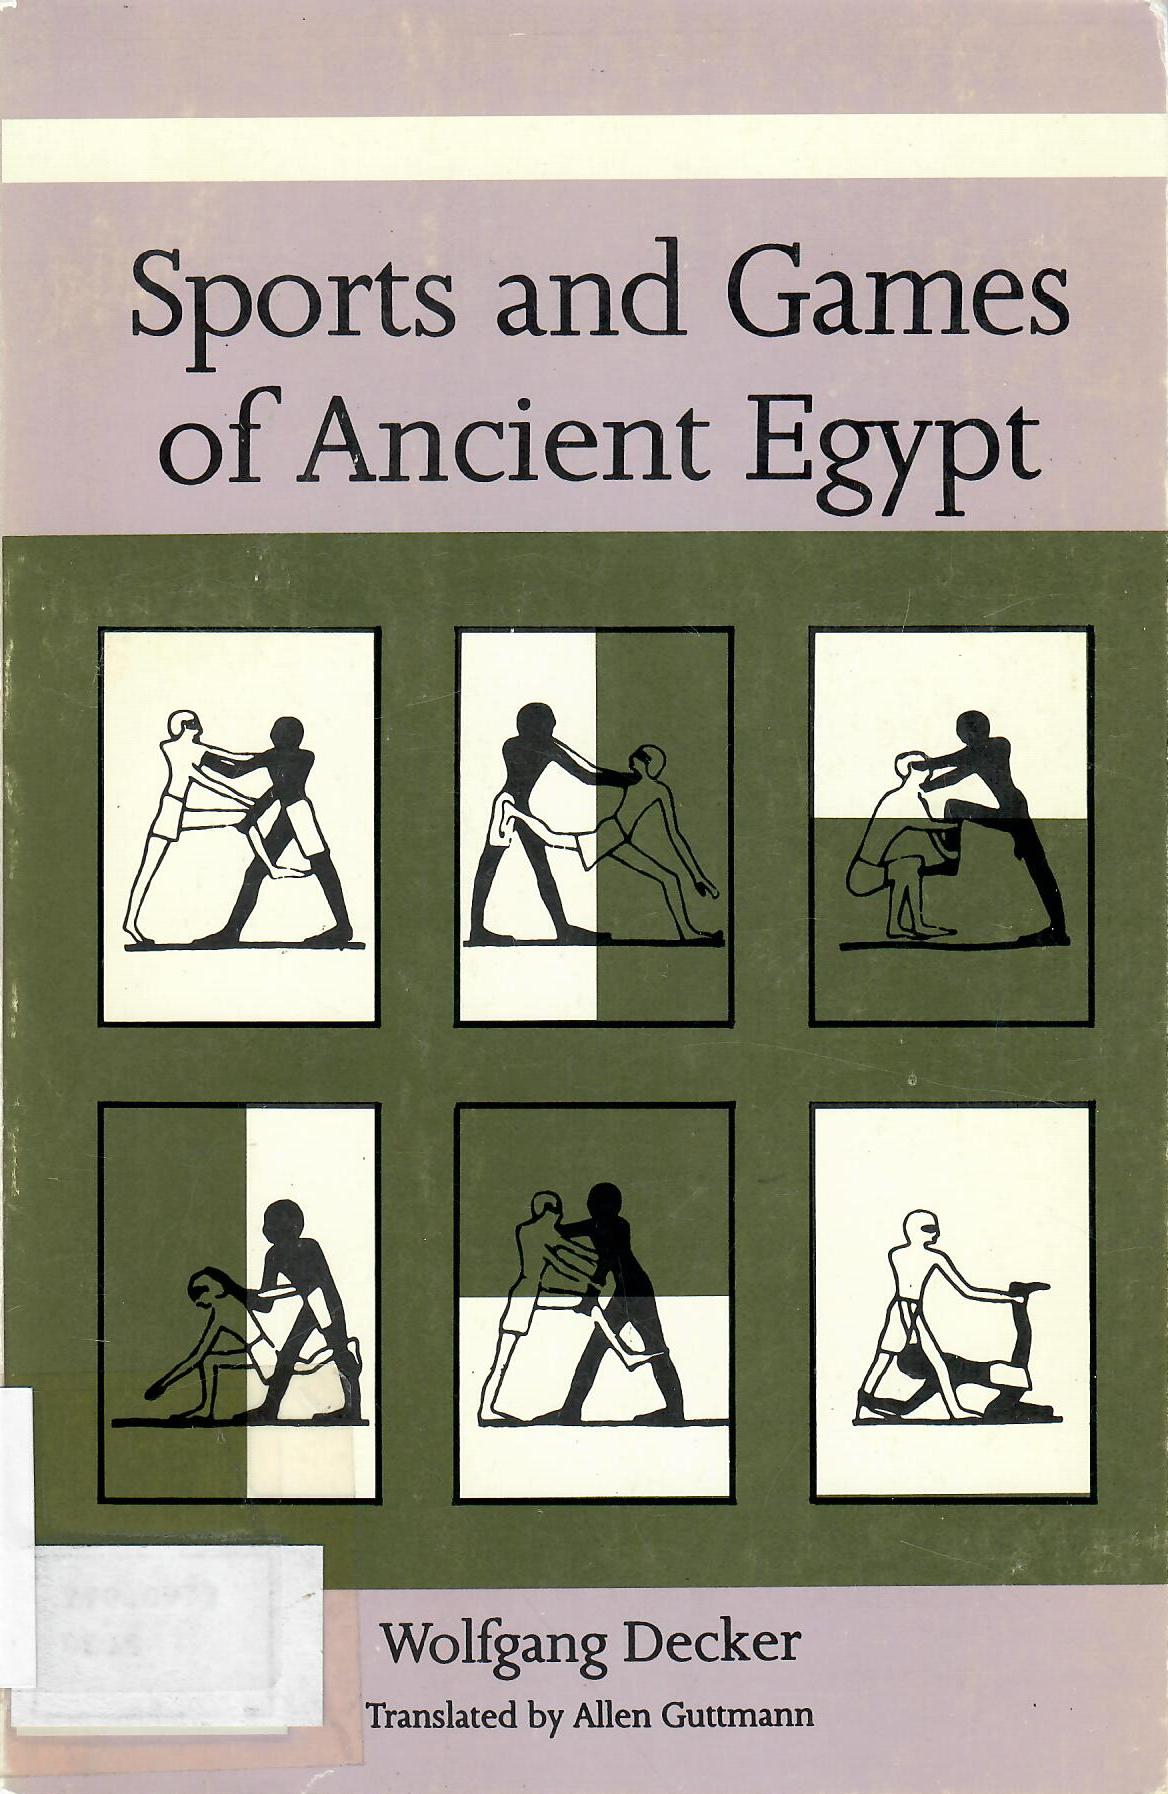 Sports and Games of Ancient Egyption